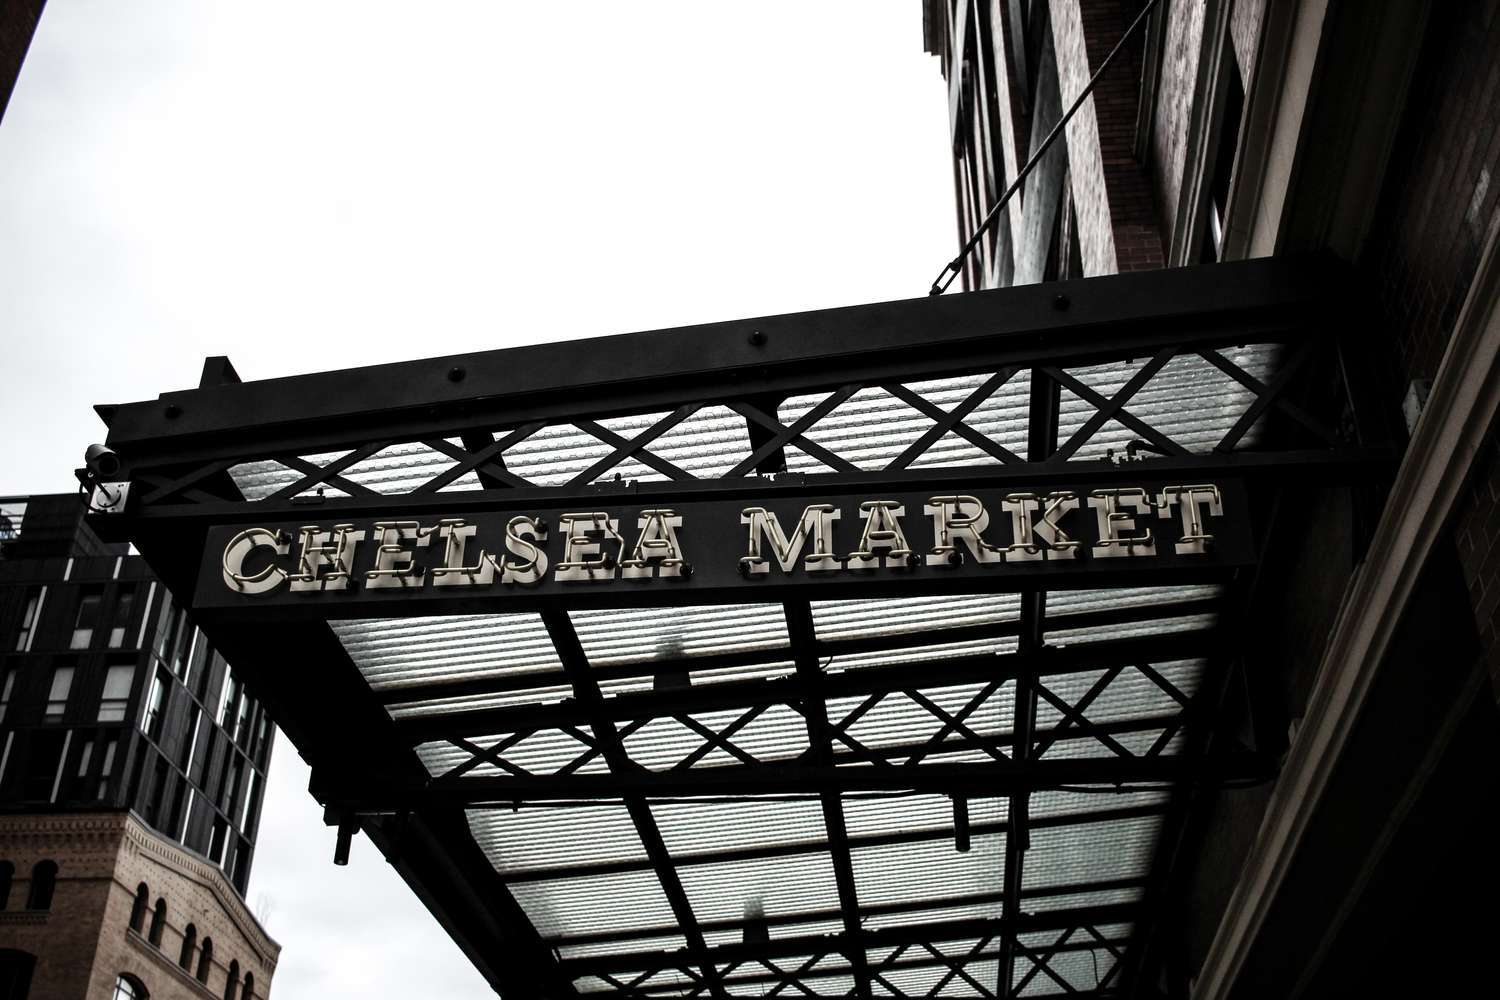 The sign of Chelsea market